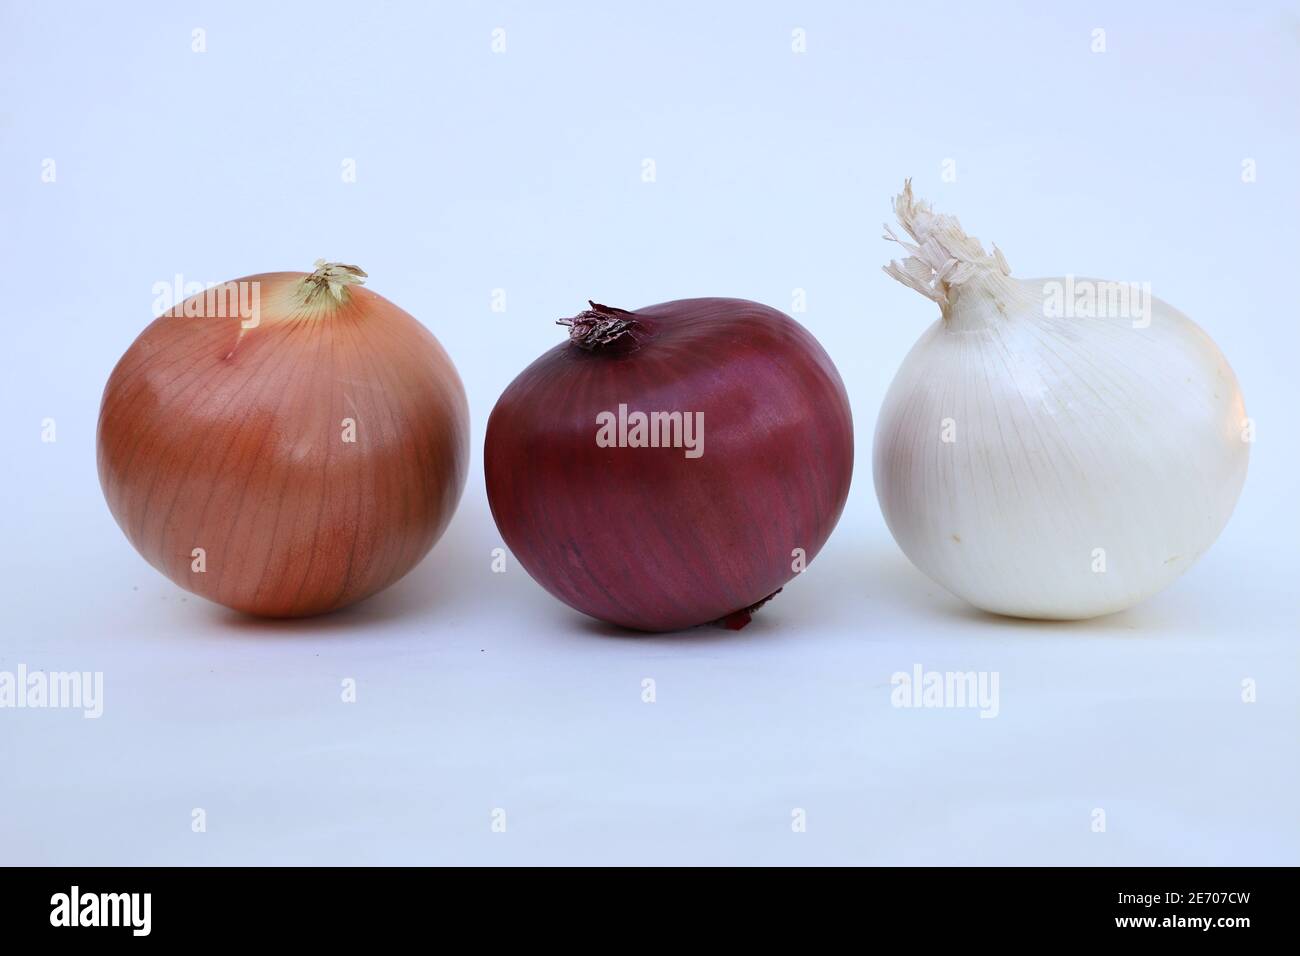 Trio of red, yellow and white onion against a white background Stock Photo